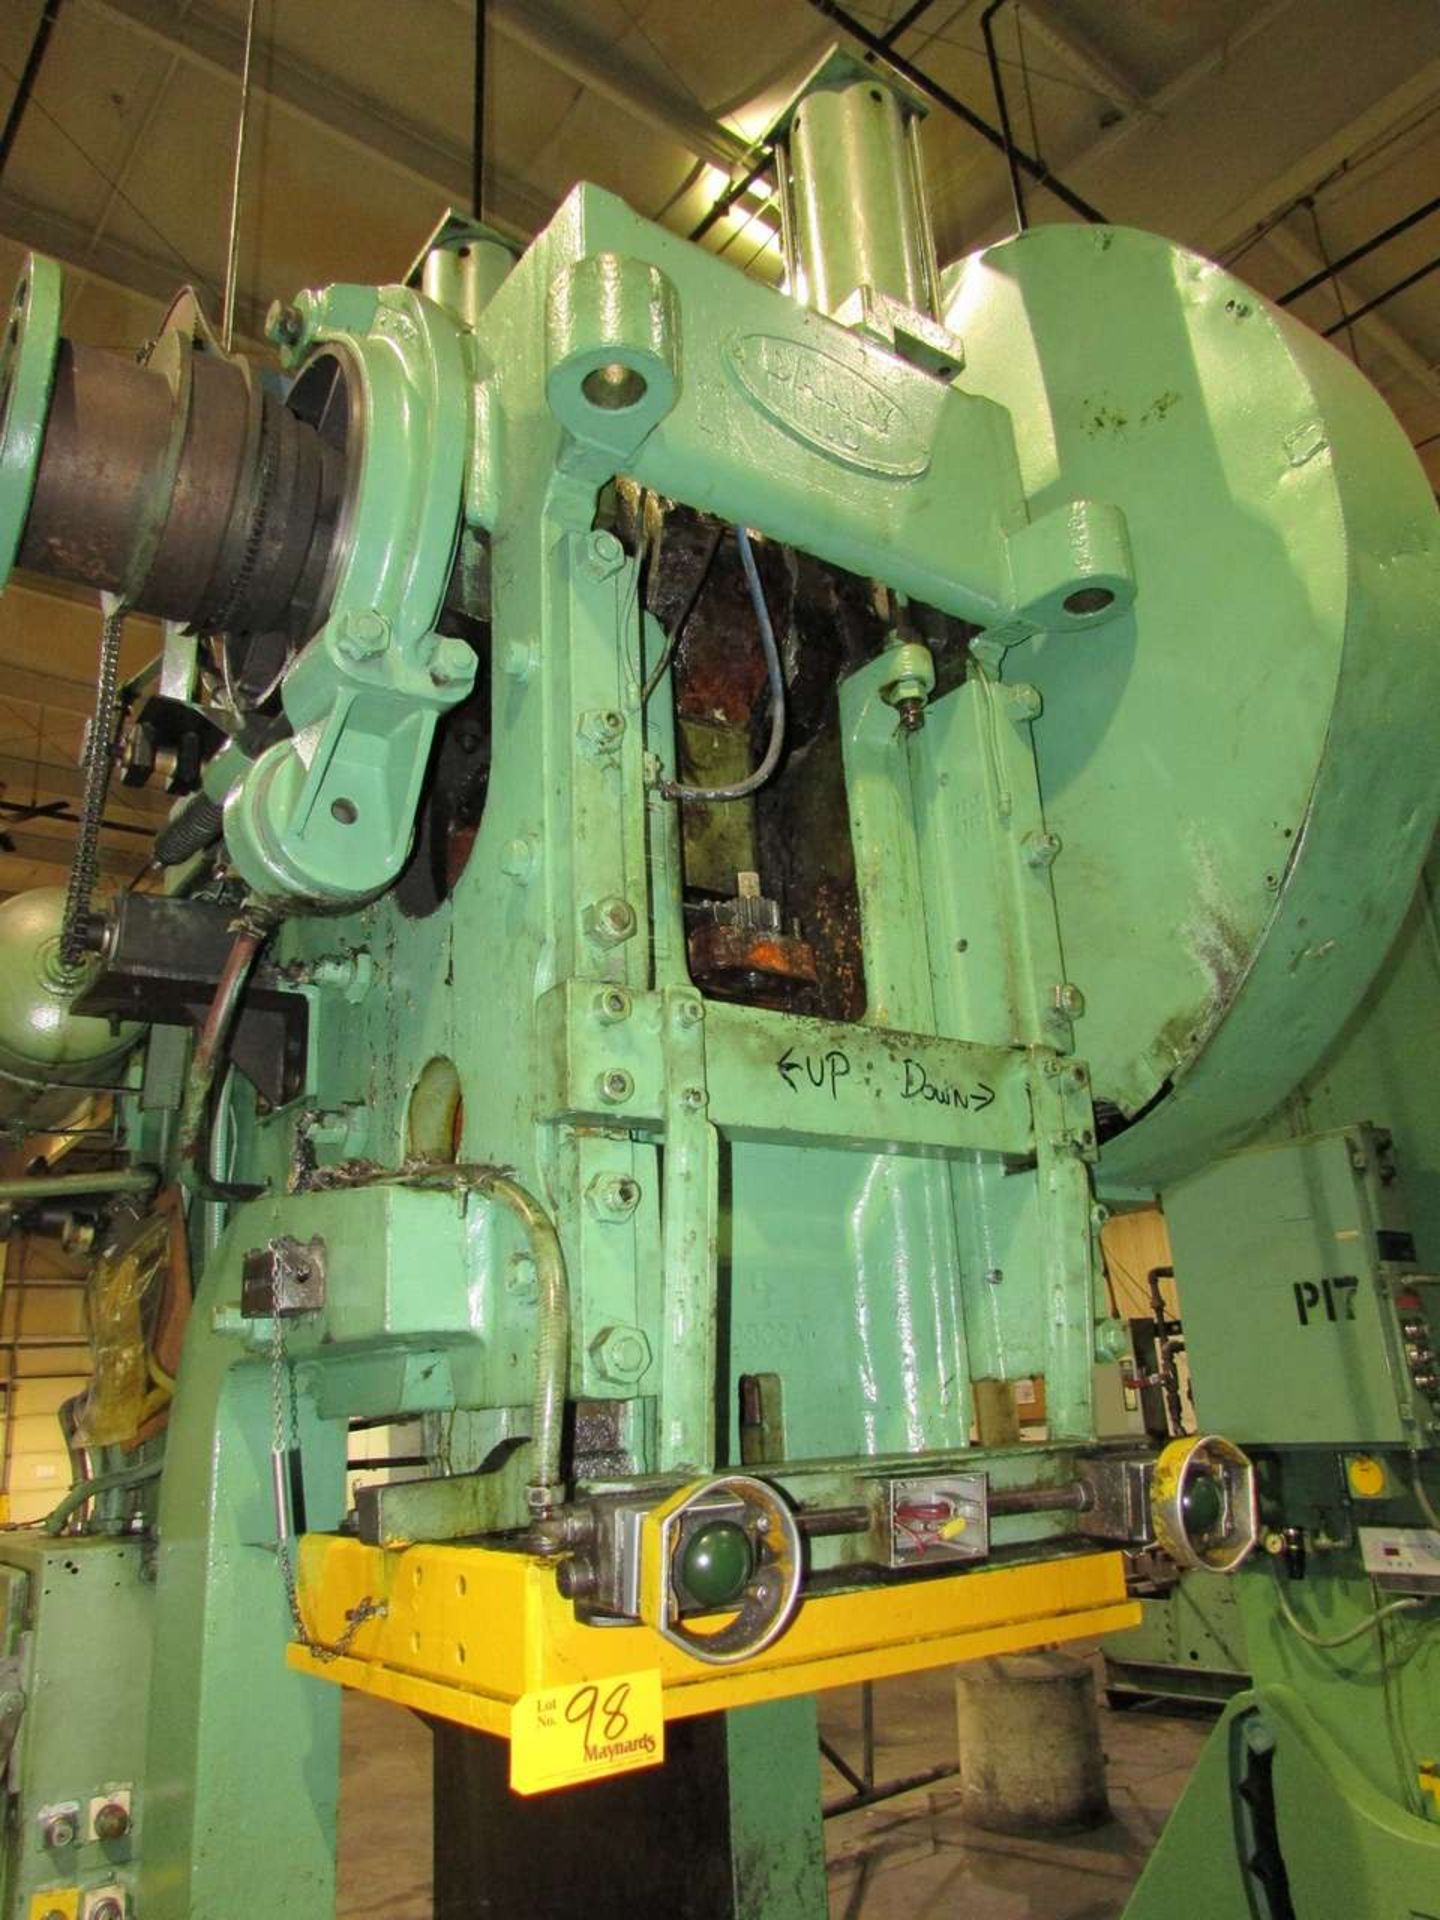 1953 Danly 110 110-Ton Open Back Inclinable Press - Image 11 of 15